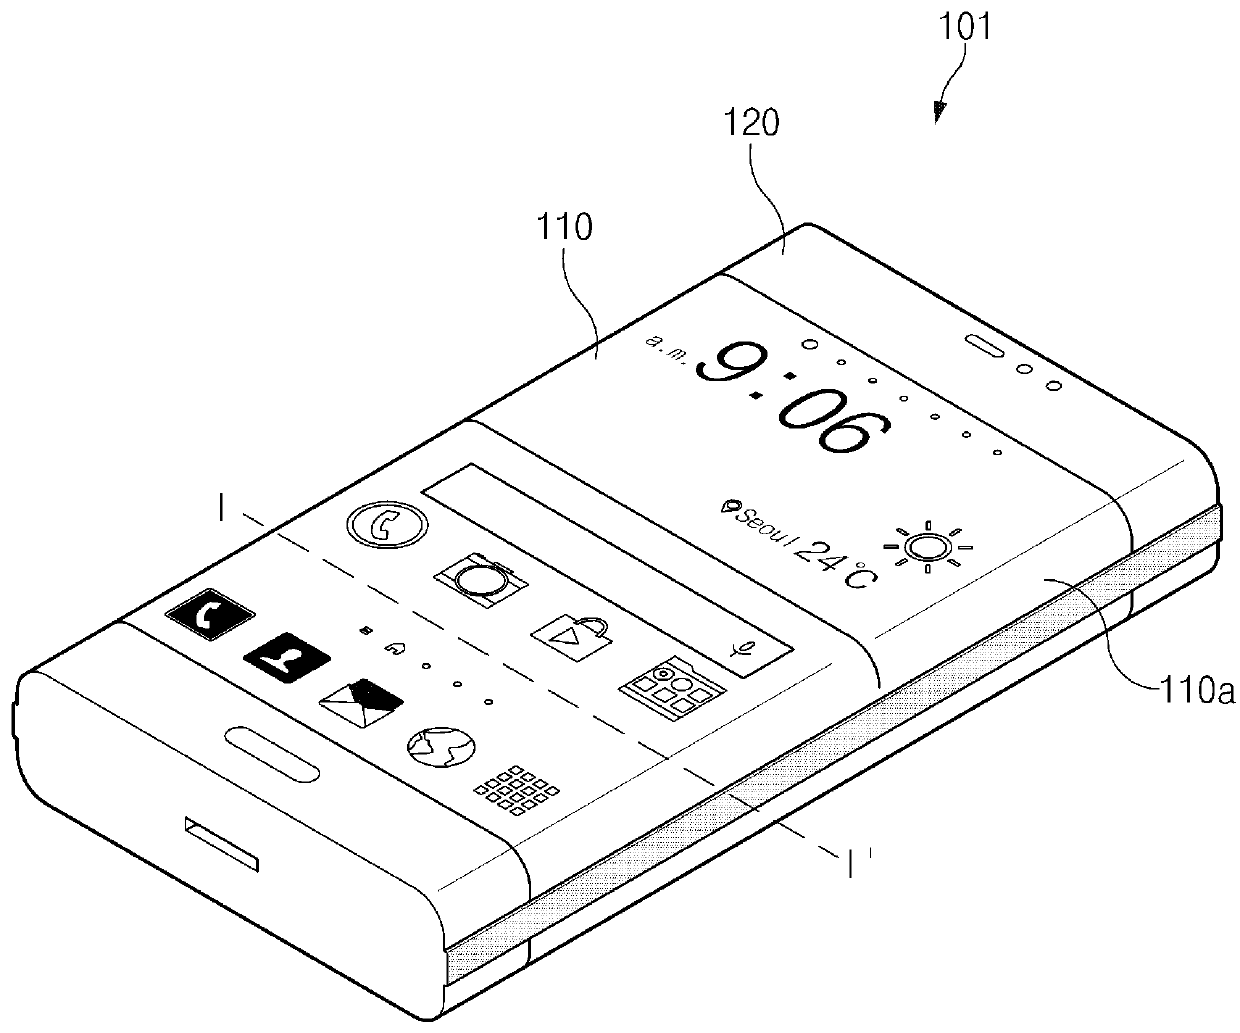 Electronic device with screen